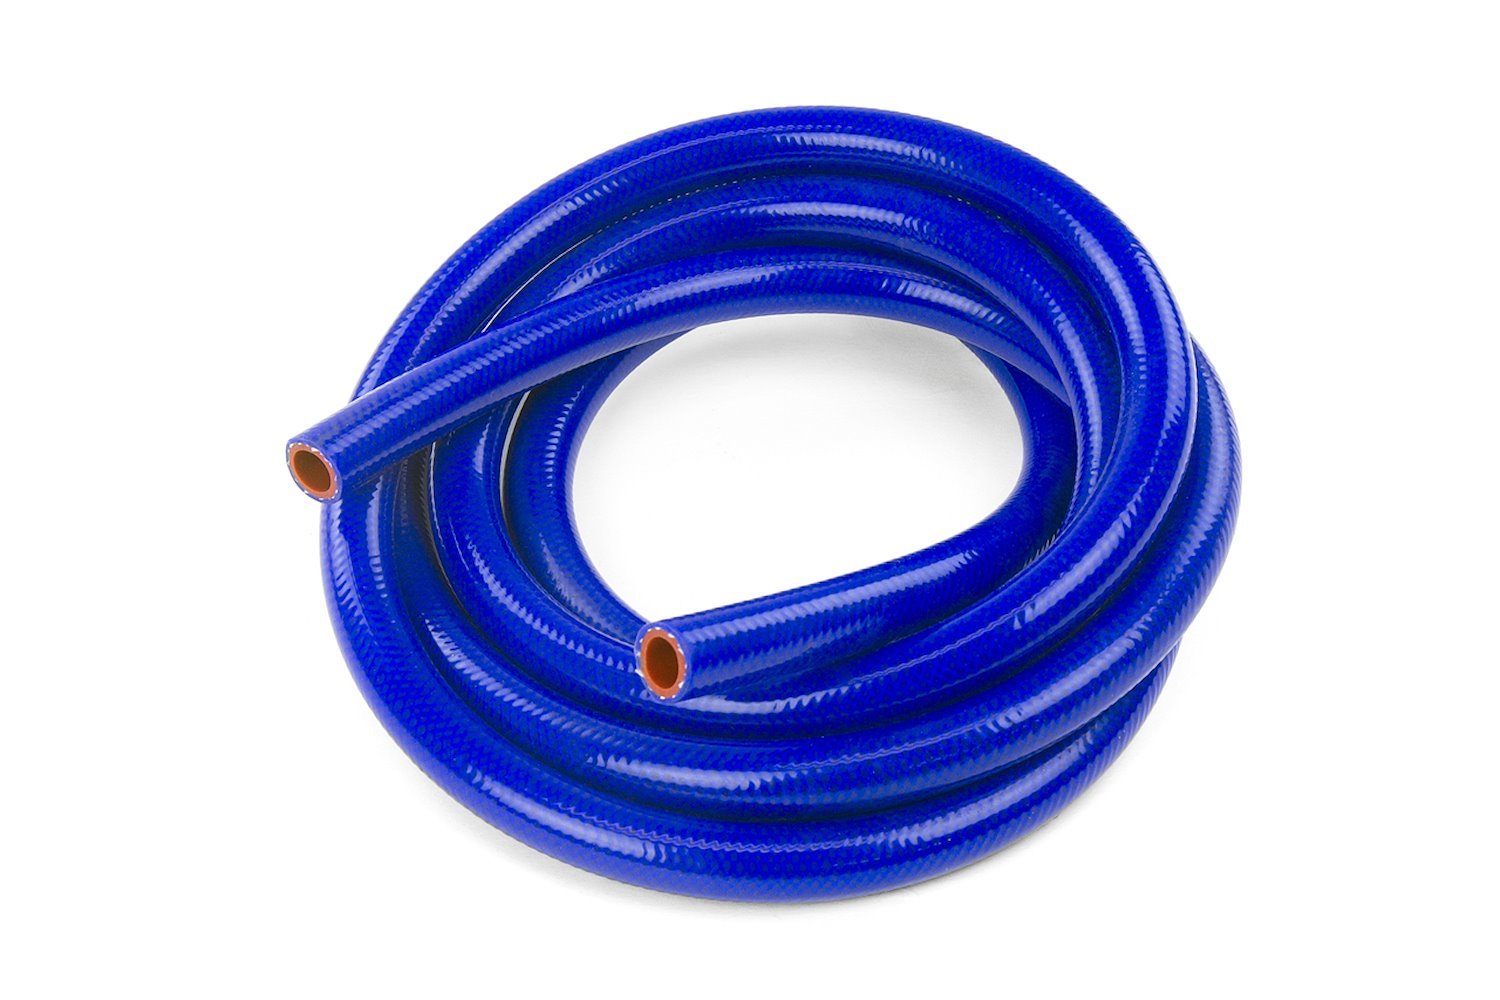 HTHH-062-BLUEx10 Silicone Heater Hose Tubing, High-Temp 1-Ply Reinforced, 5/8 in. ID, 10 ft. Roll, Blue